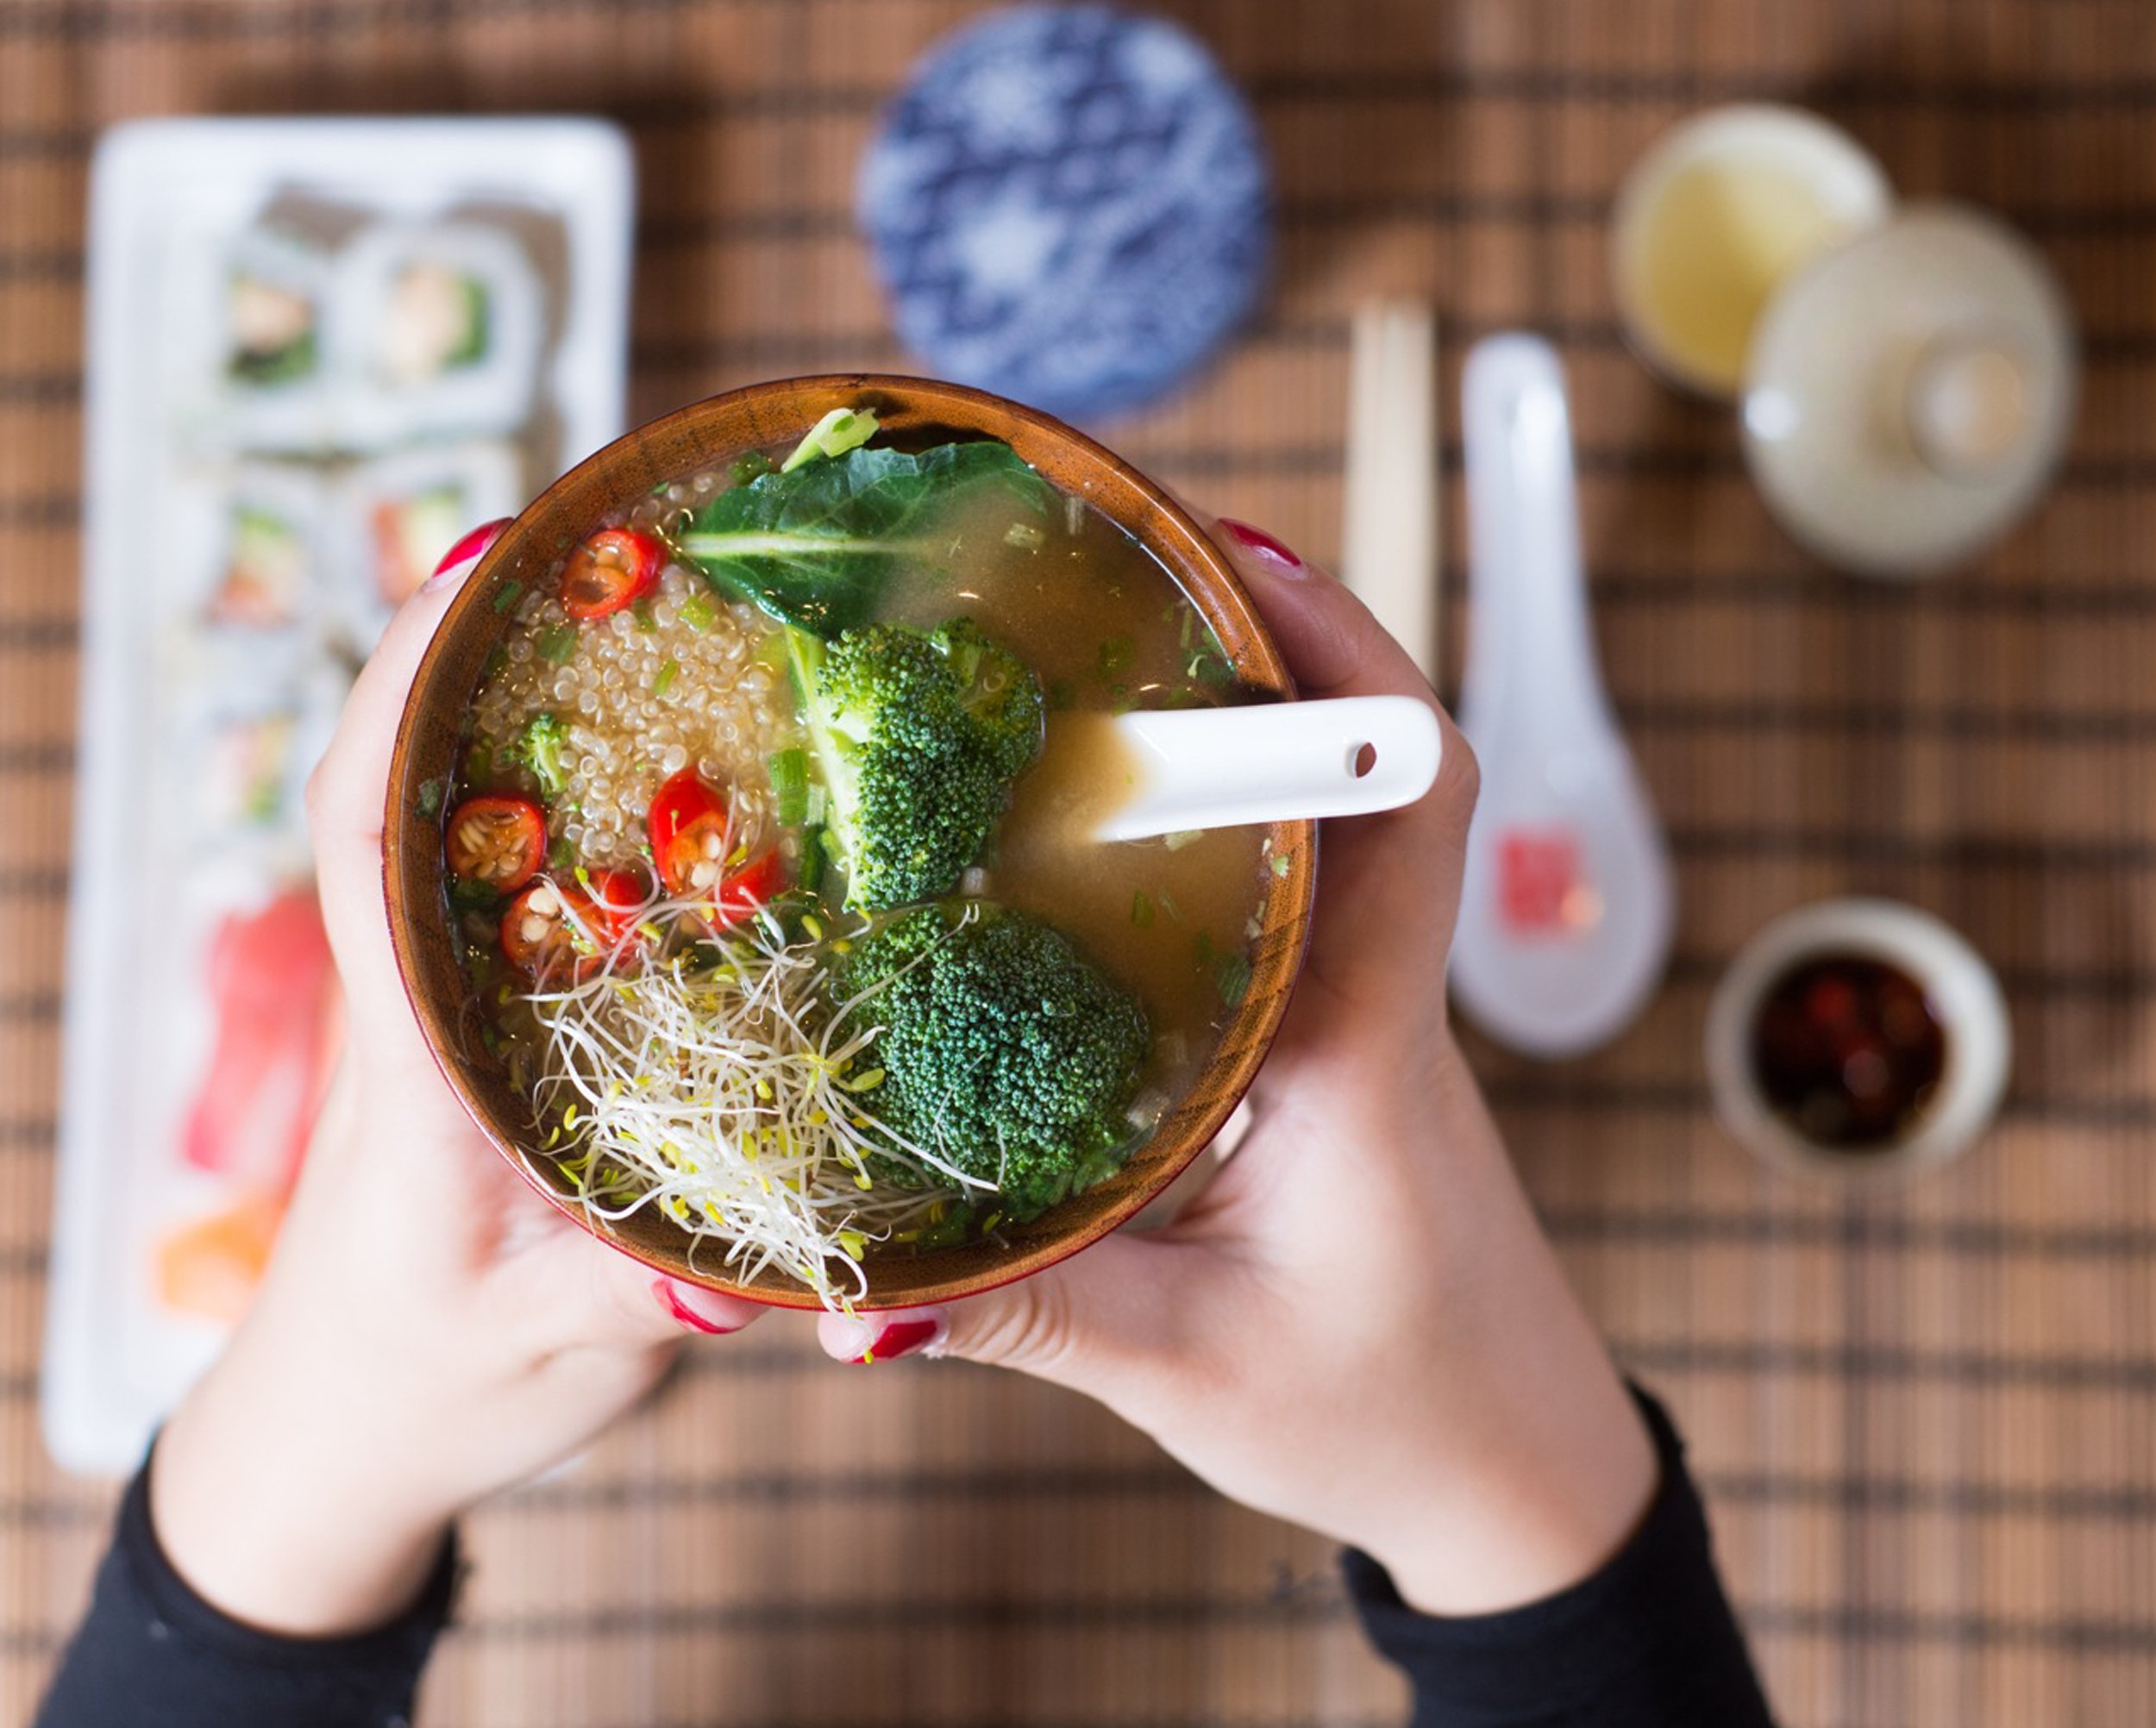 MISO – THE ANCIENT SUPERFOOD! — Miso Tasty